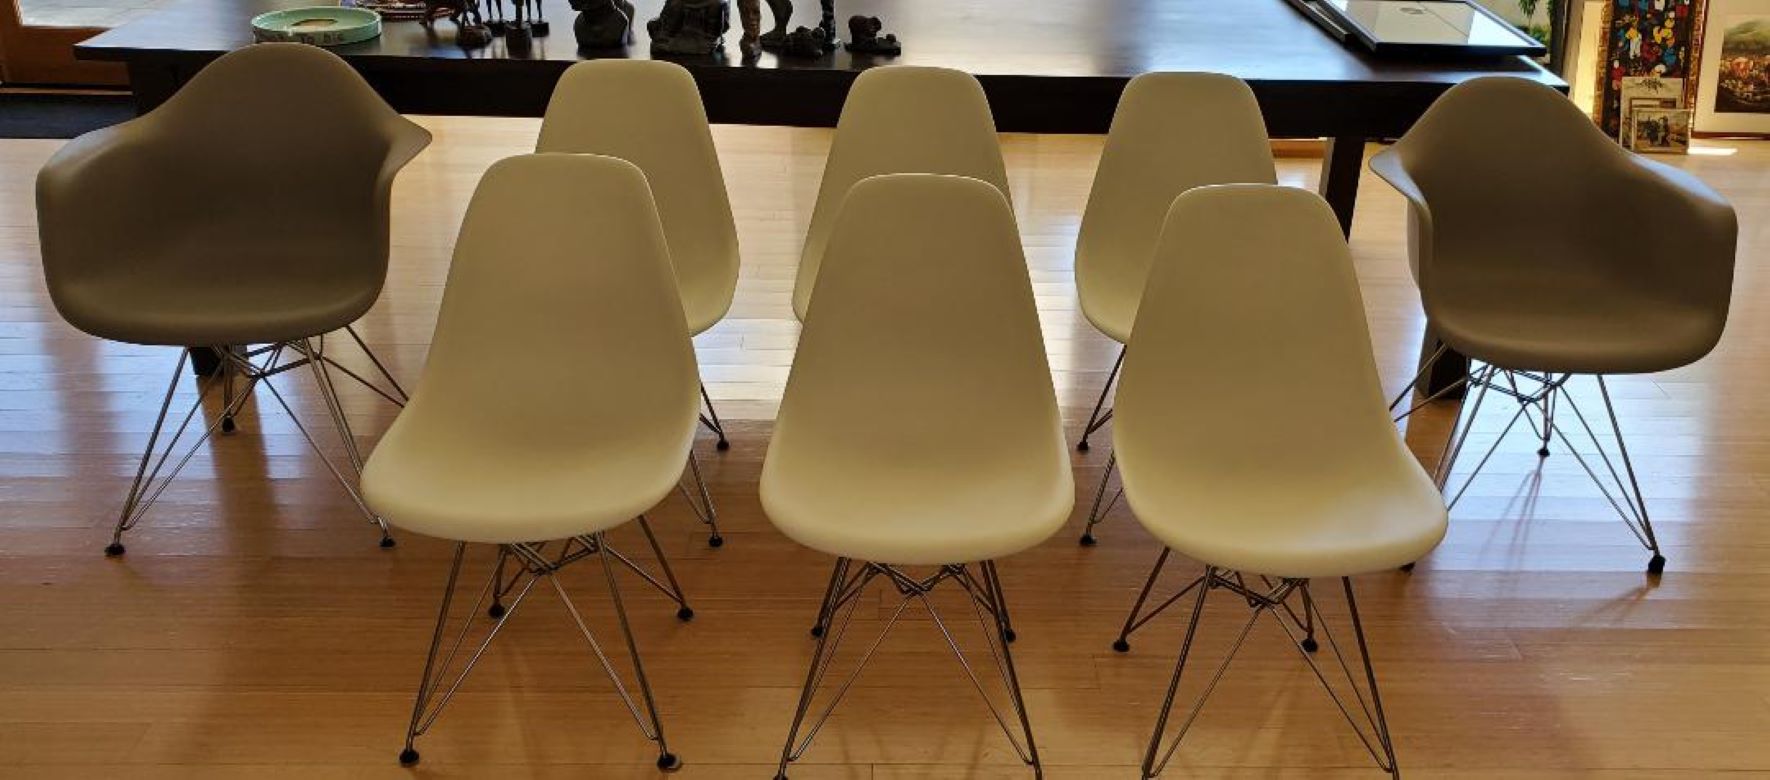 8 Eames molded plastic chairs, 2 DAR arm chairsand 6 DSR side chairs with Eiffel Tower bases for dining and office.

